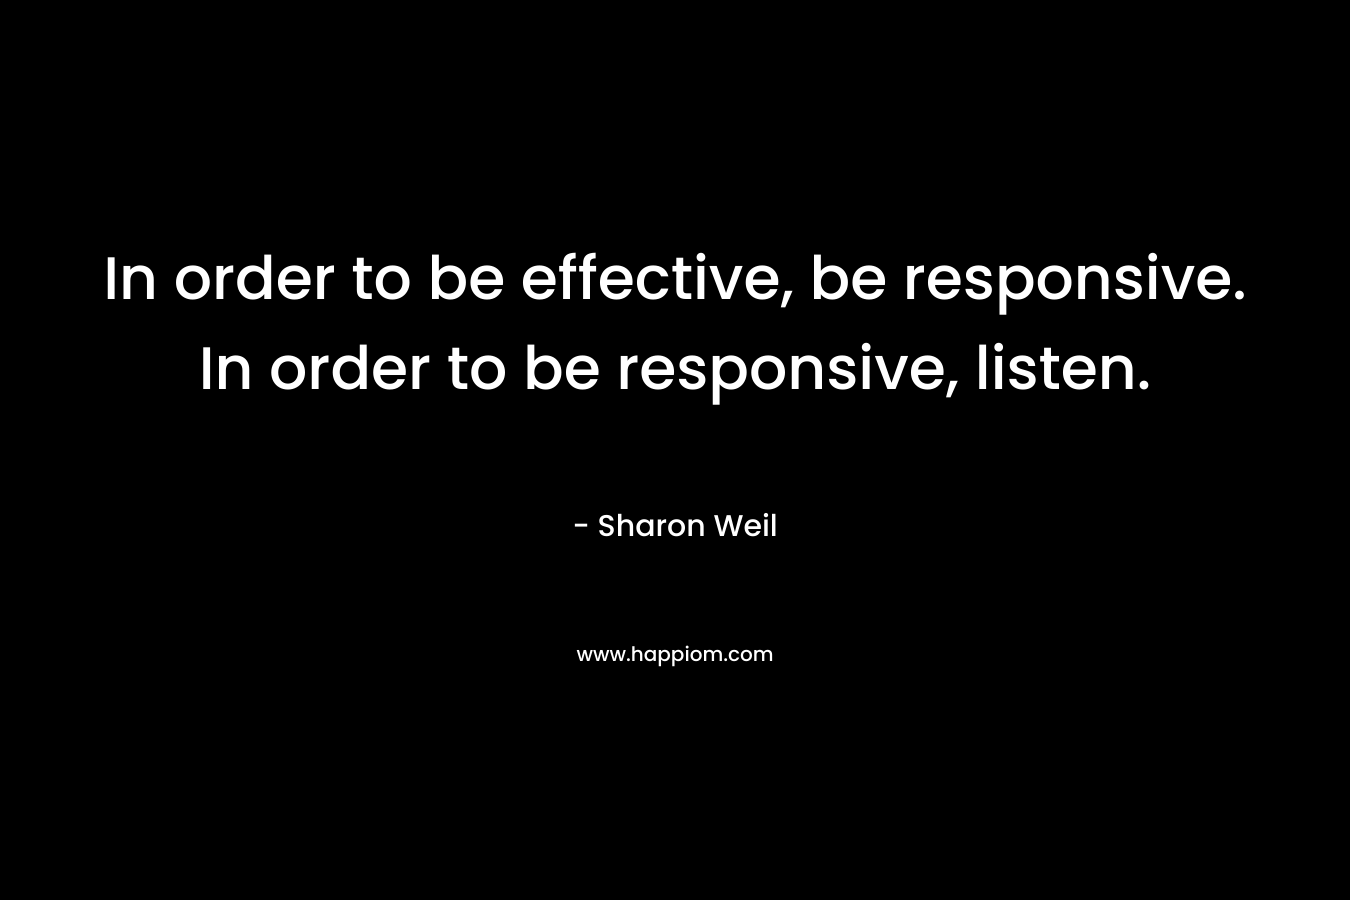 In order to be effective, be responsive. In order to be responsive, listen. – Sharon Weil